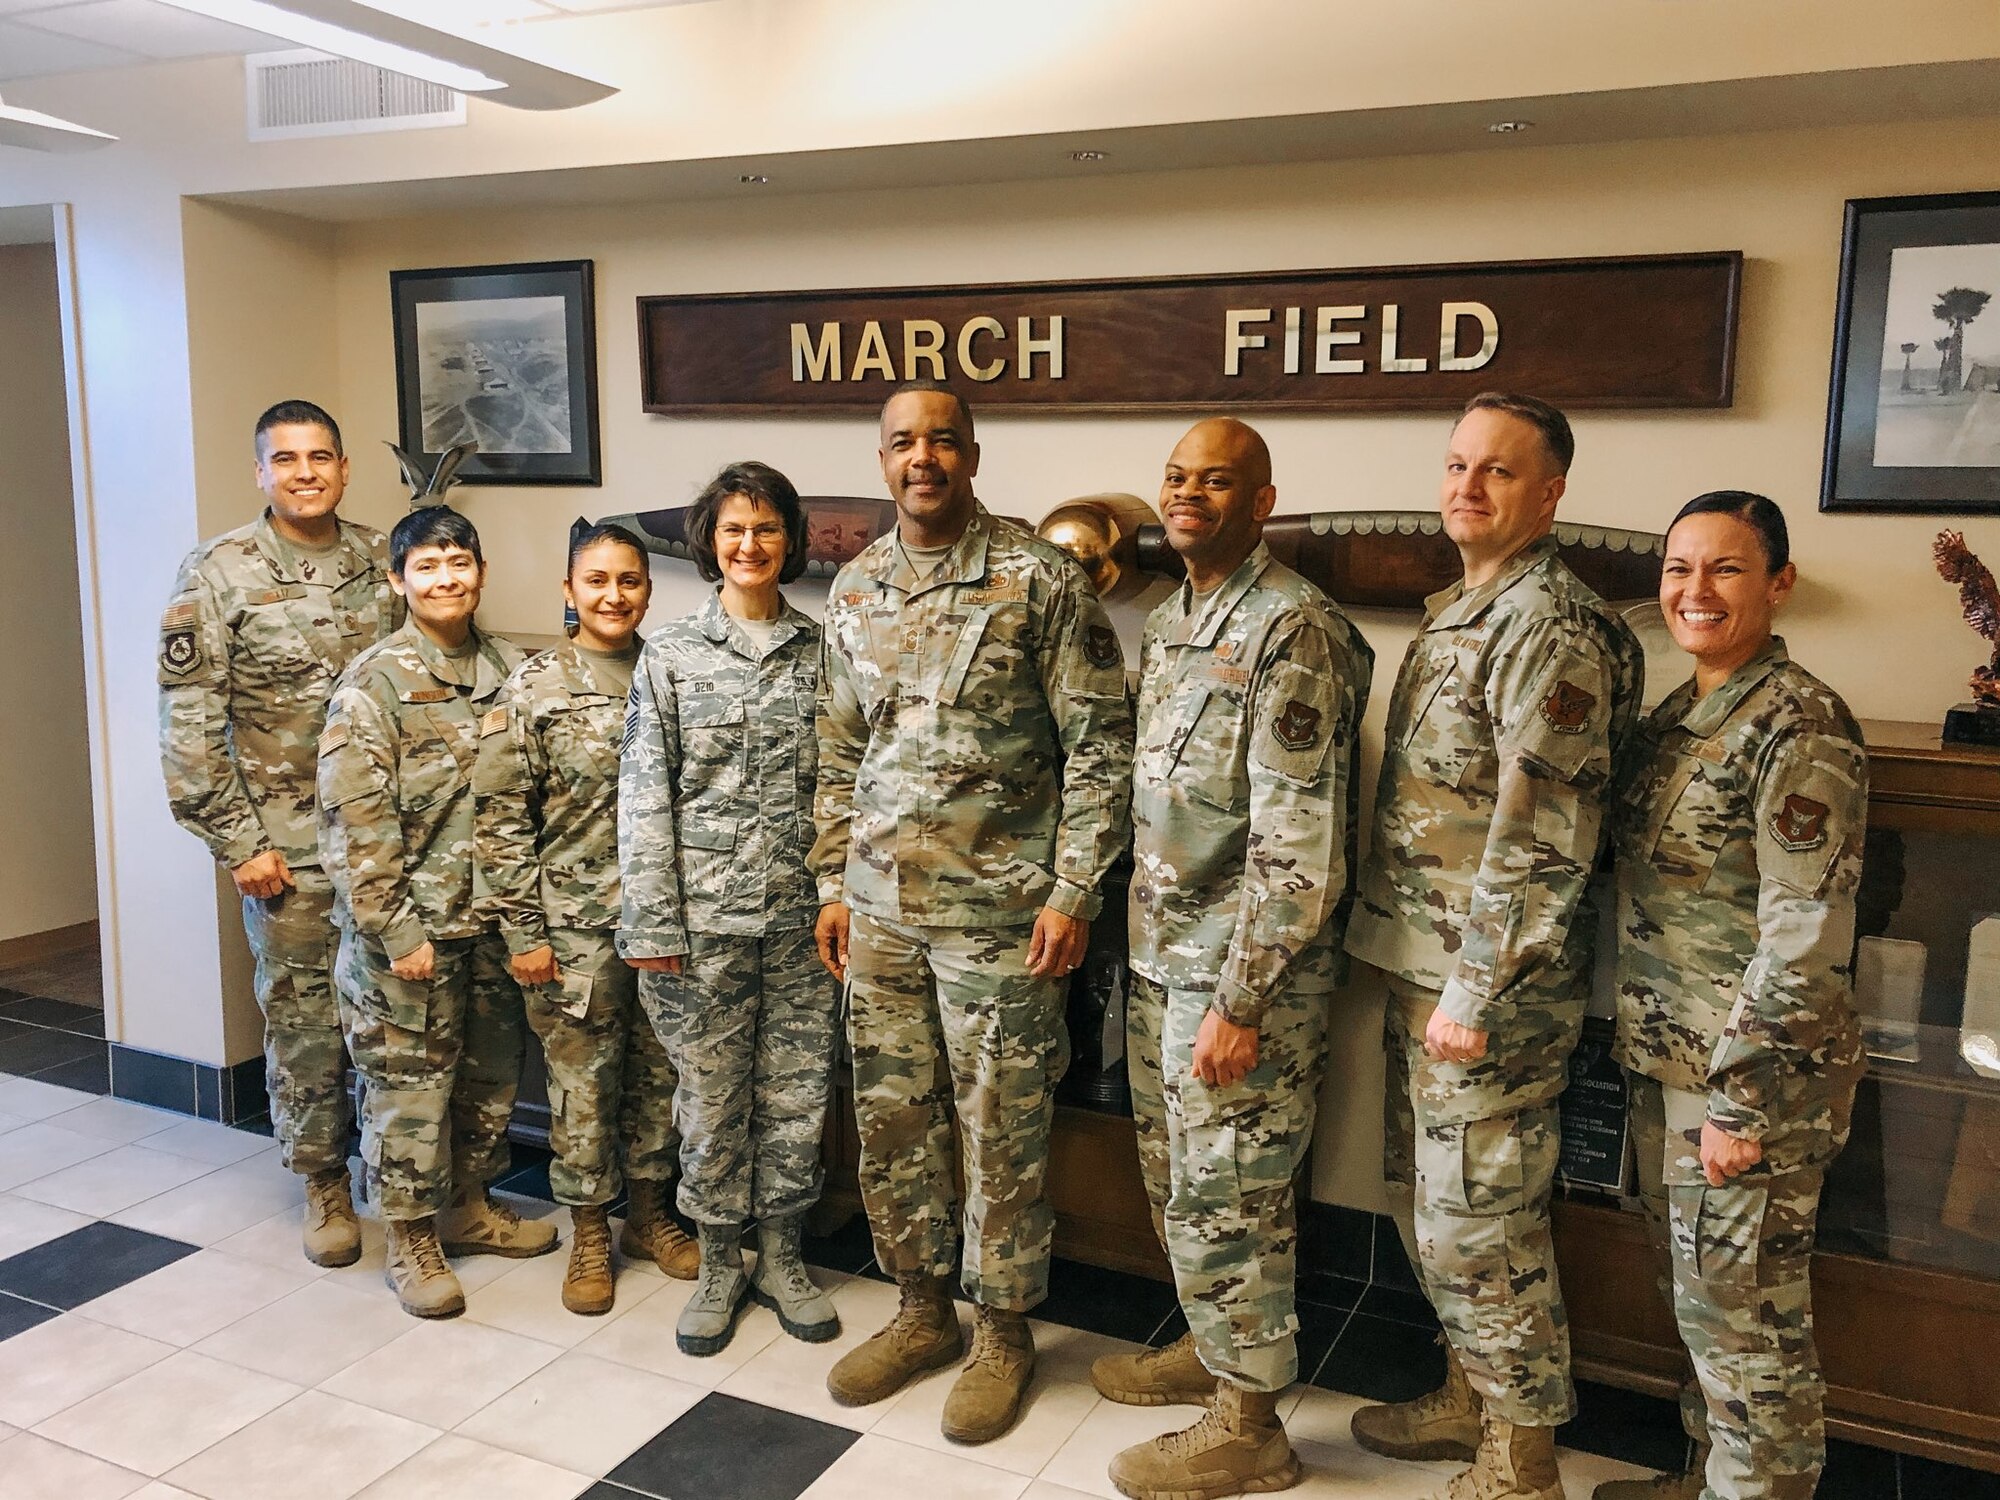 Chief Master Sgt. Timothy White is shown here with the Senior Enlisted Council at March Air Reserve Base, California, in January, before COVID-19 social distancing practices were implemented. Left to right are Chief Master Sgts. Octavio Ortiz, Imelda Johnson, Cynthia Villa, Shirley Ozio, White, Travon Dennis, Jim Loper and Billie Baber.